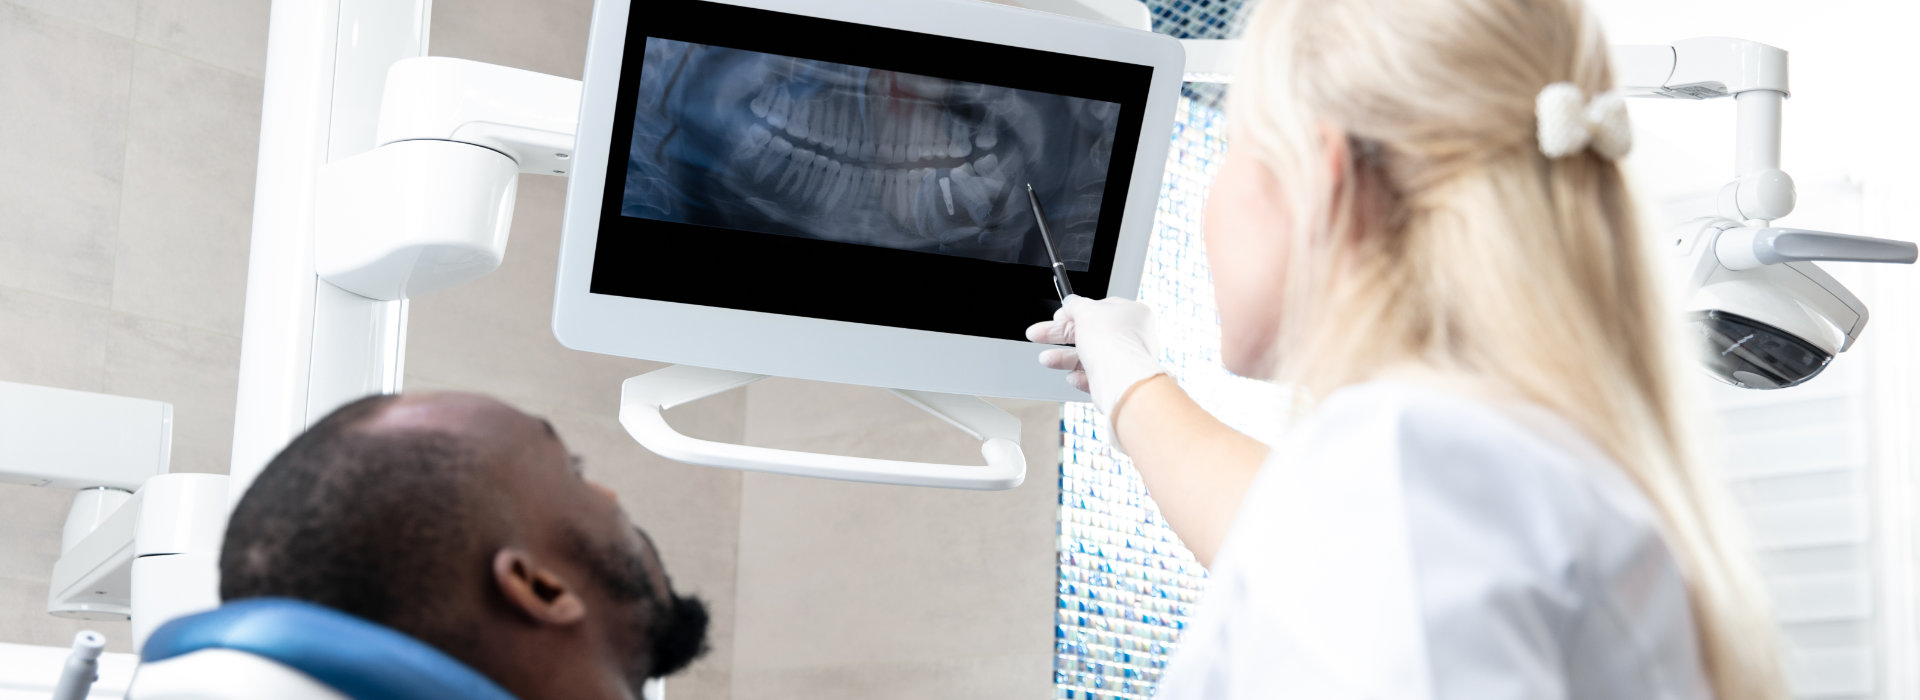 The dentist is showing the dental x-ray results to the patient.